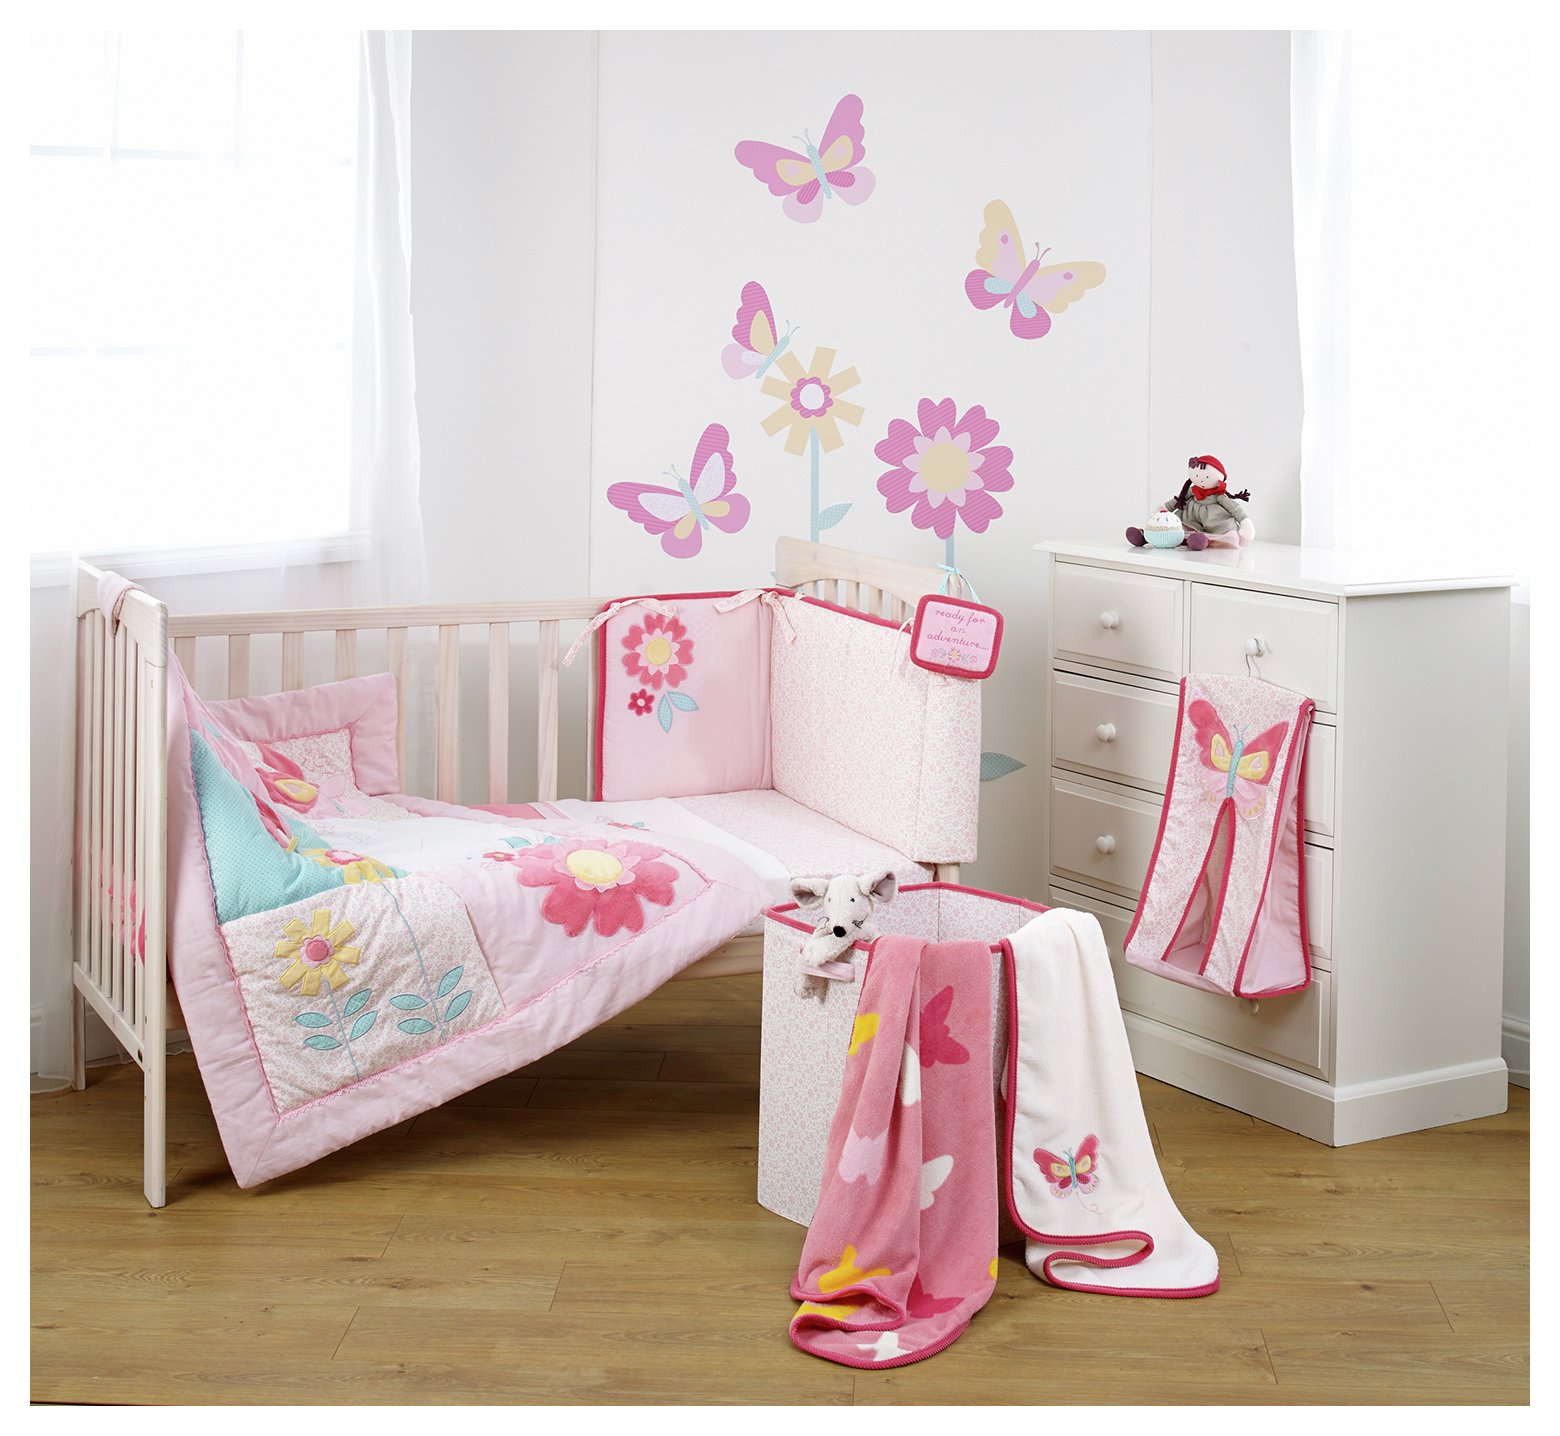 Suncrest Beyond the Meadow Cot Bed Nursery Bedding Set